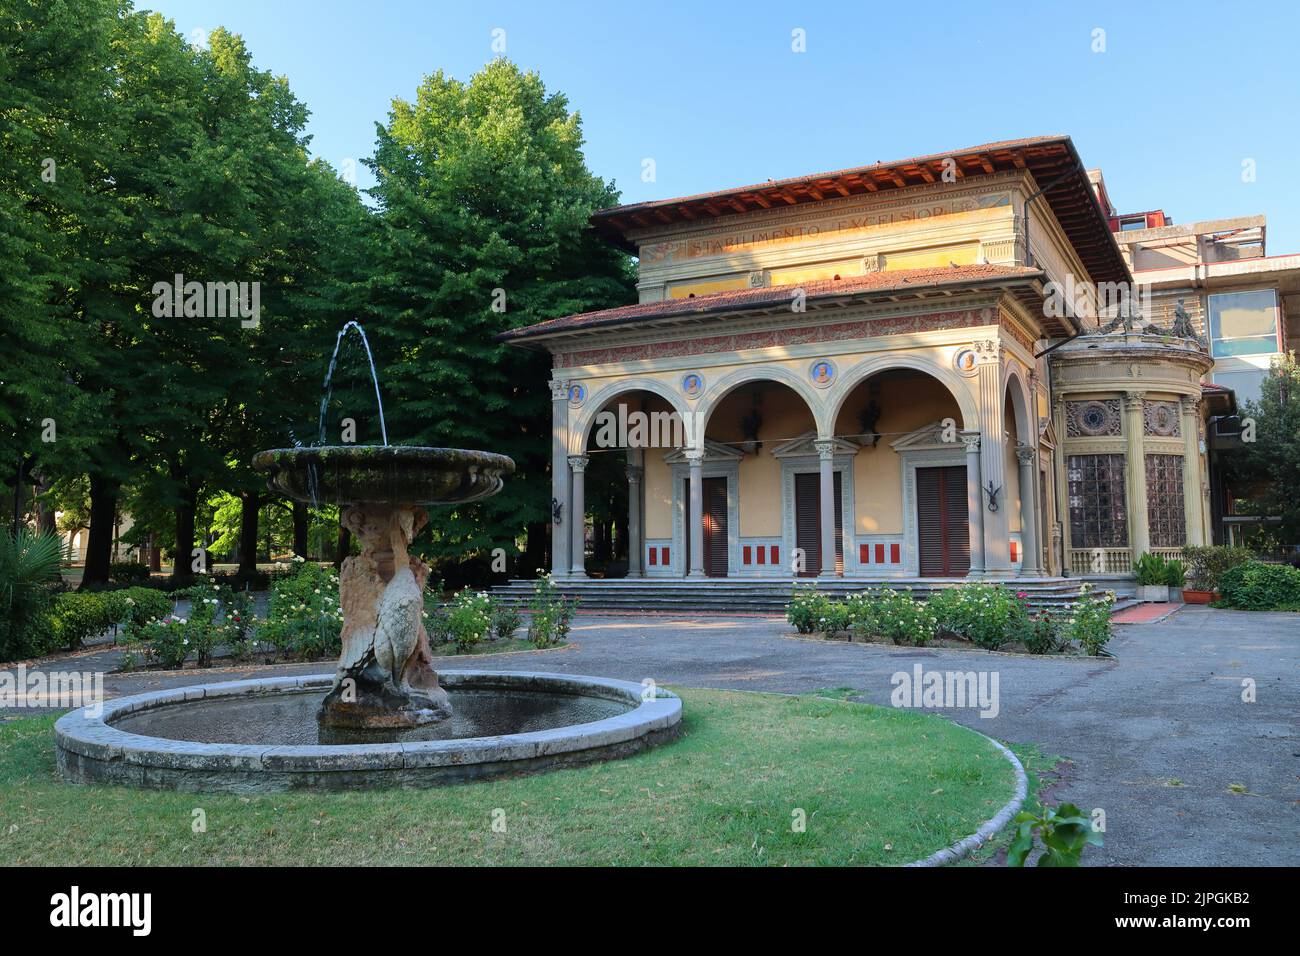 An old Spa Building with a Fountain in the Forground. Montecatini Terme, Tuscany, Italy. Stock Photo